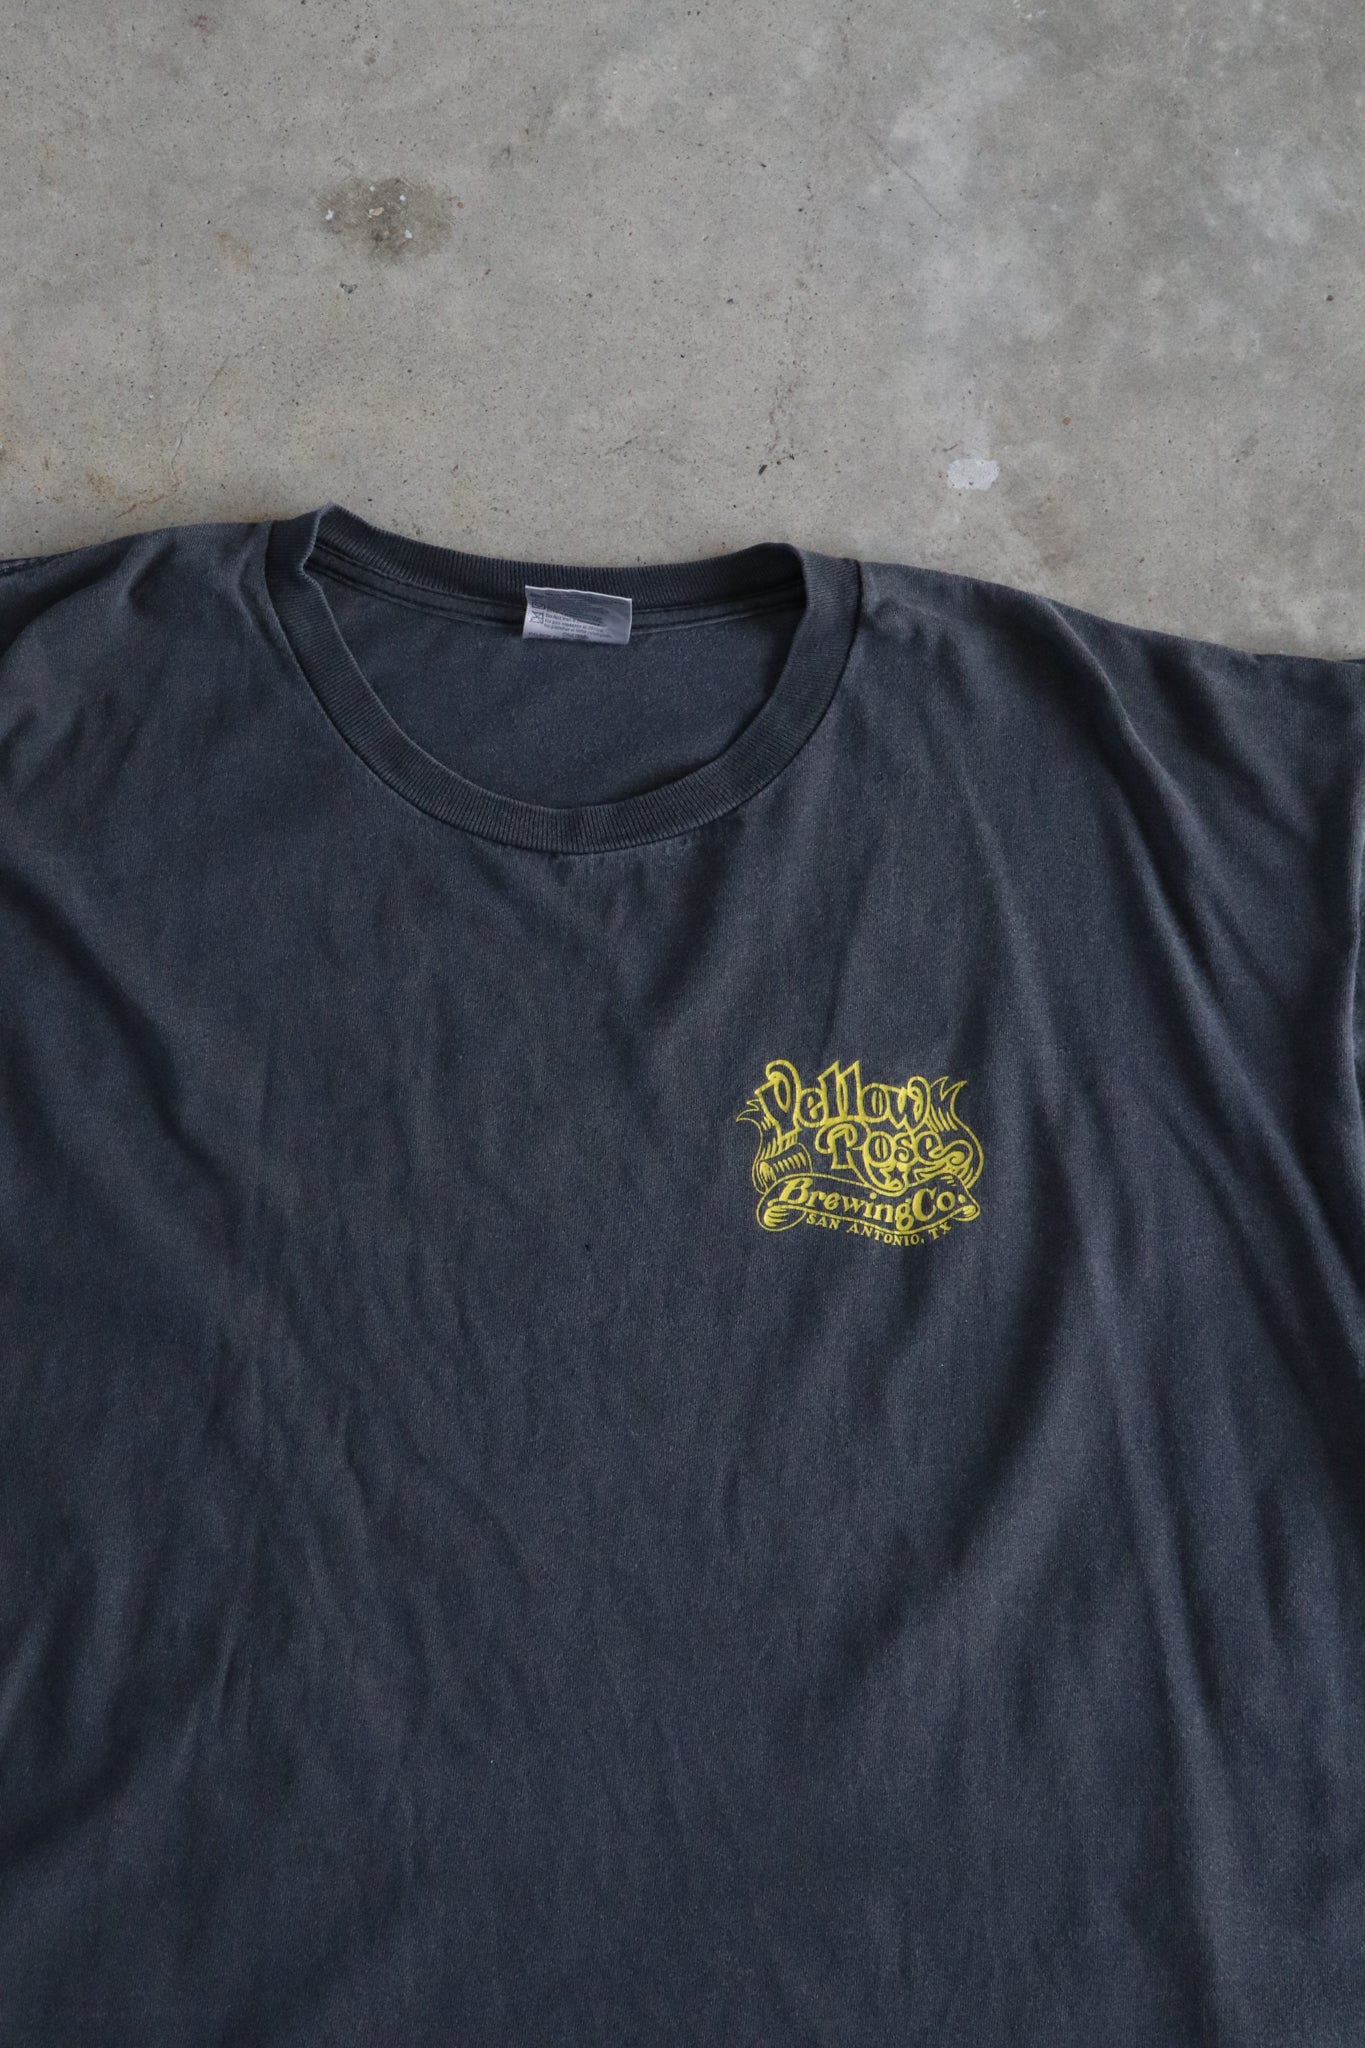 Vintage Yellow Rose Brewing Co Tee XL